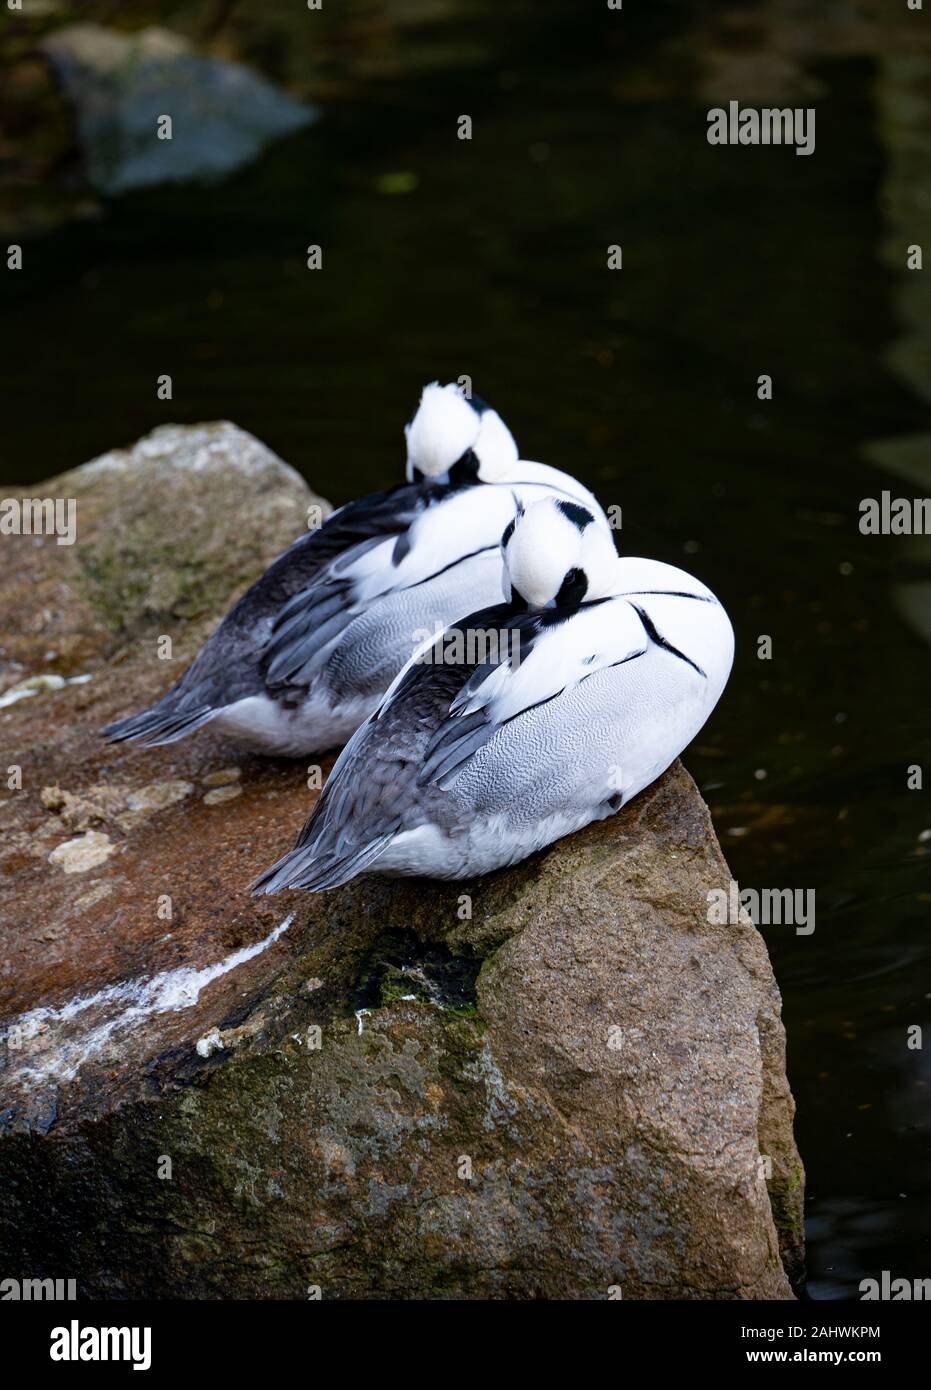 Two male Smew (Mergus albellus) black and white ducks, resting side-by-side on a rock with the same pose Stock Photo